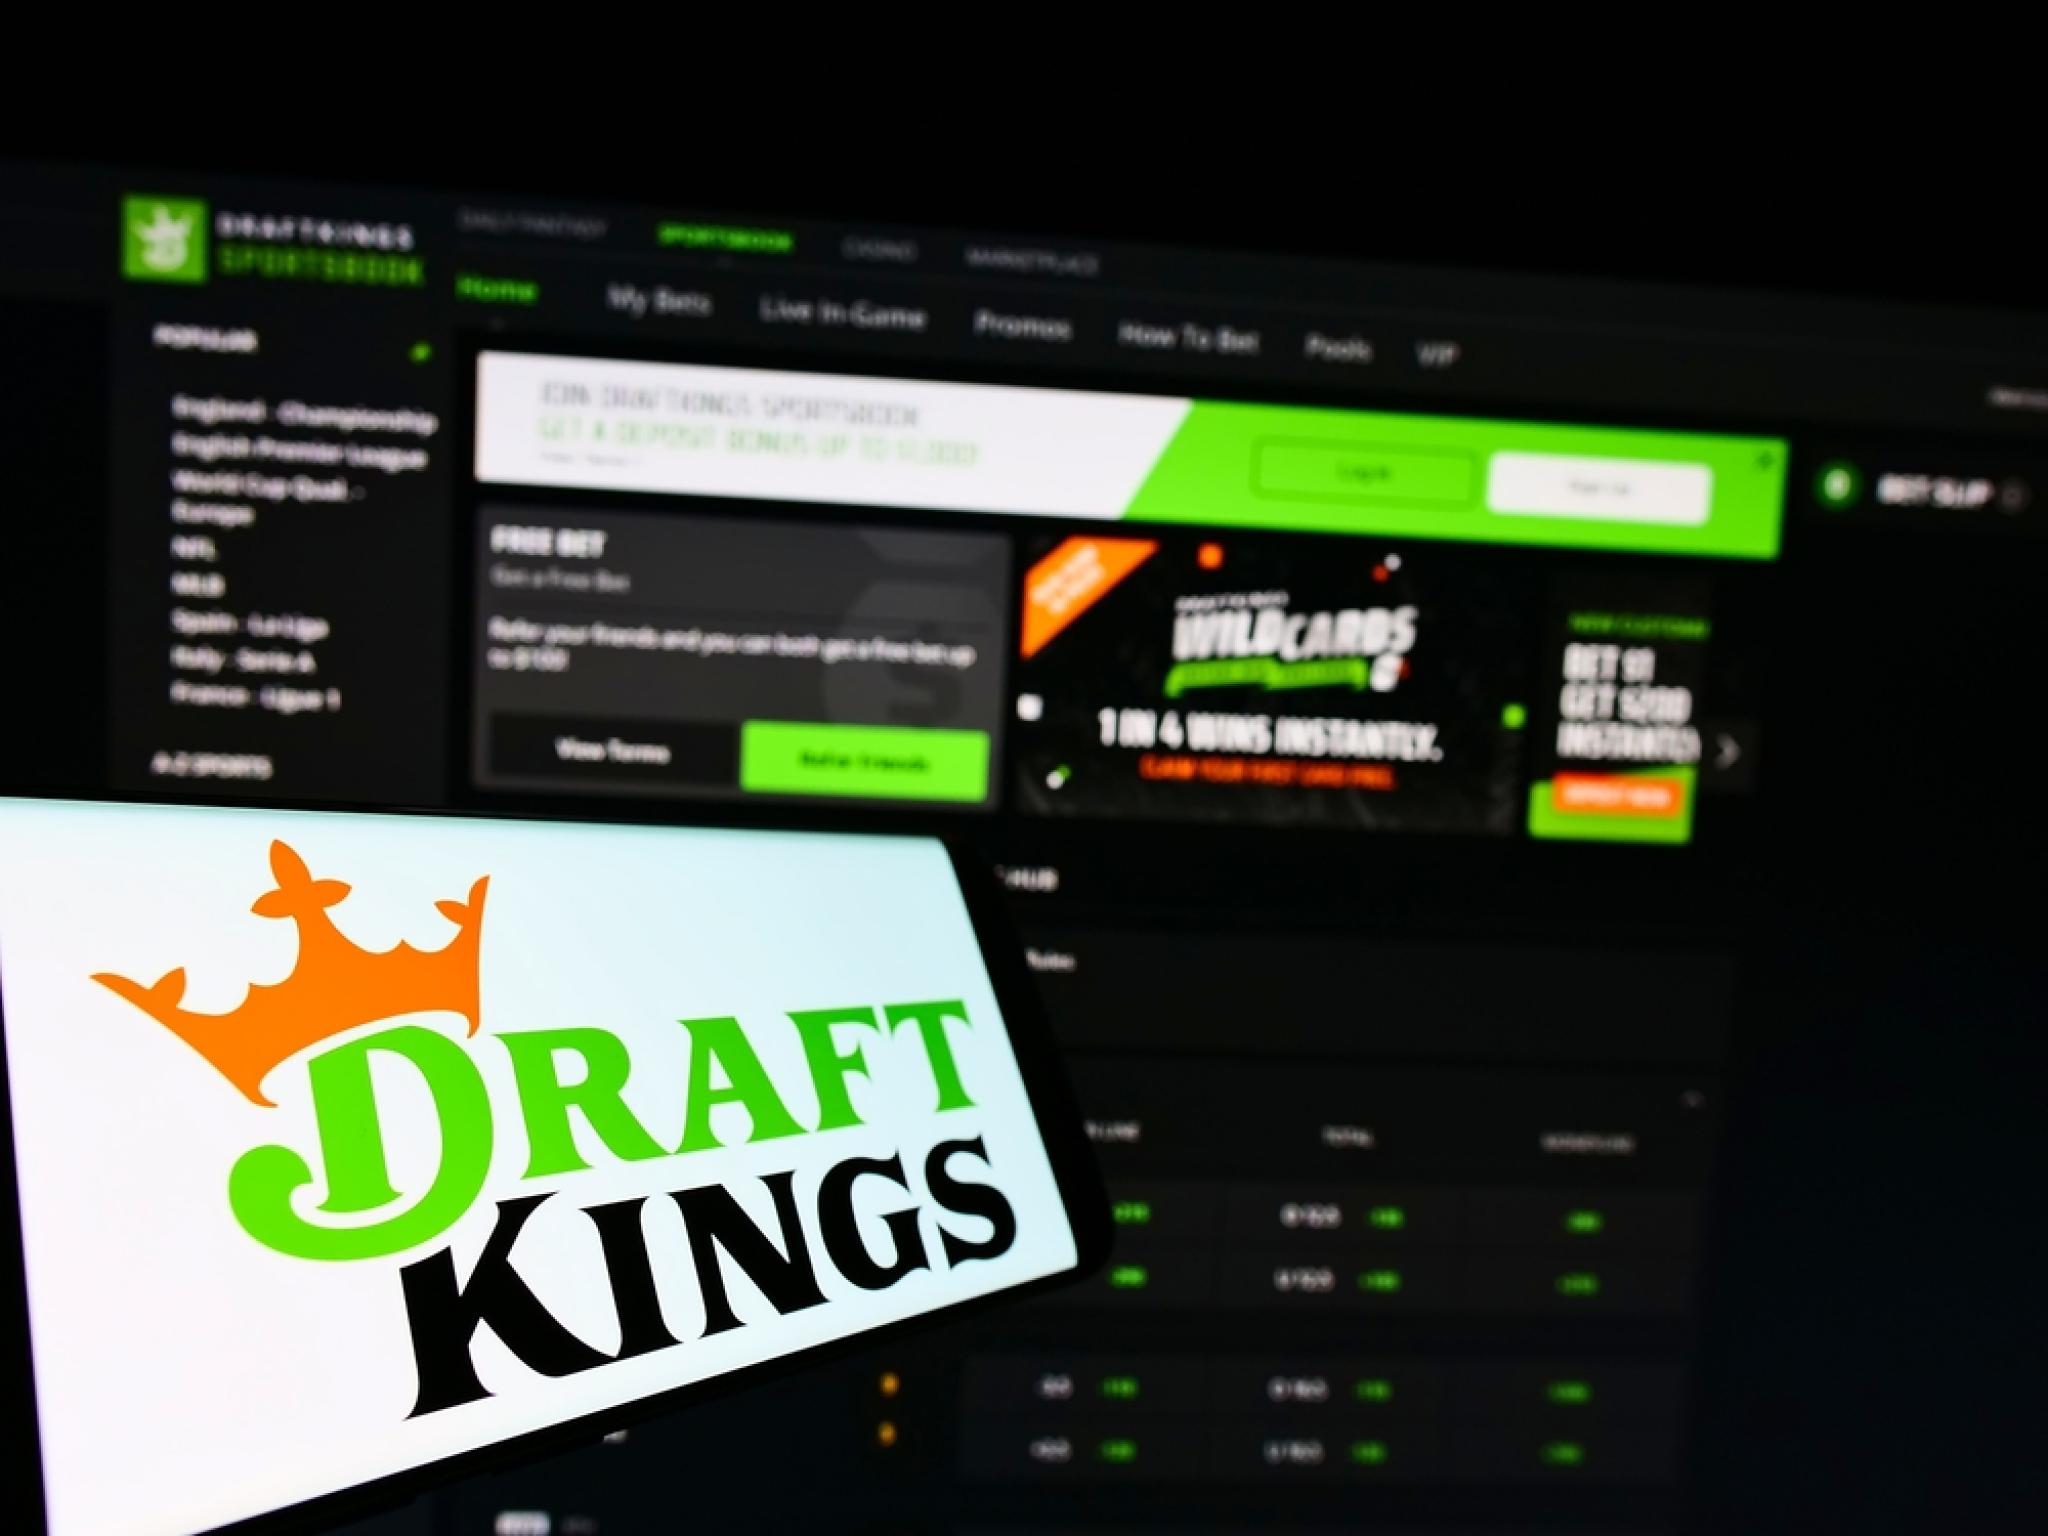  whats-going-on-with-draftkings-shares-monday 